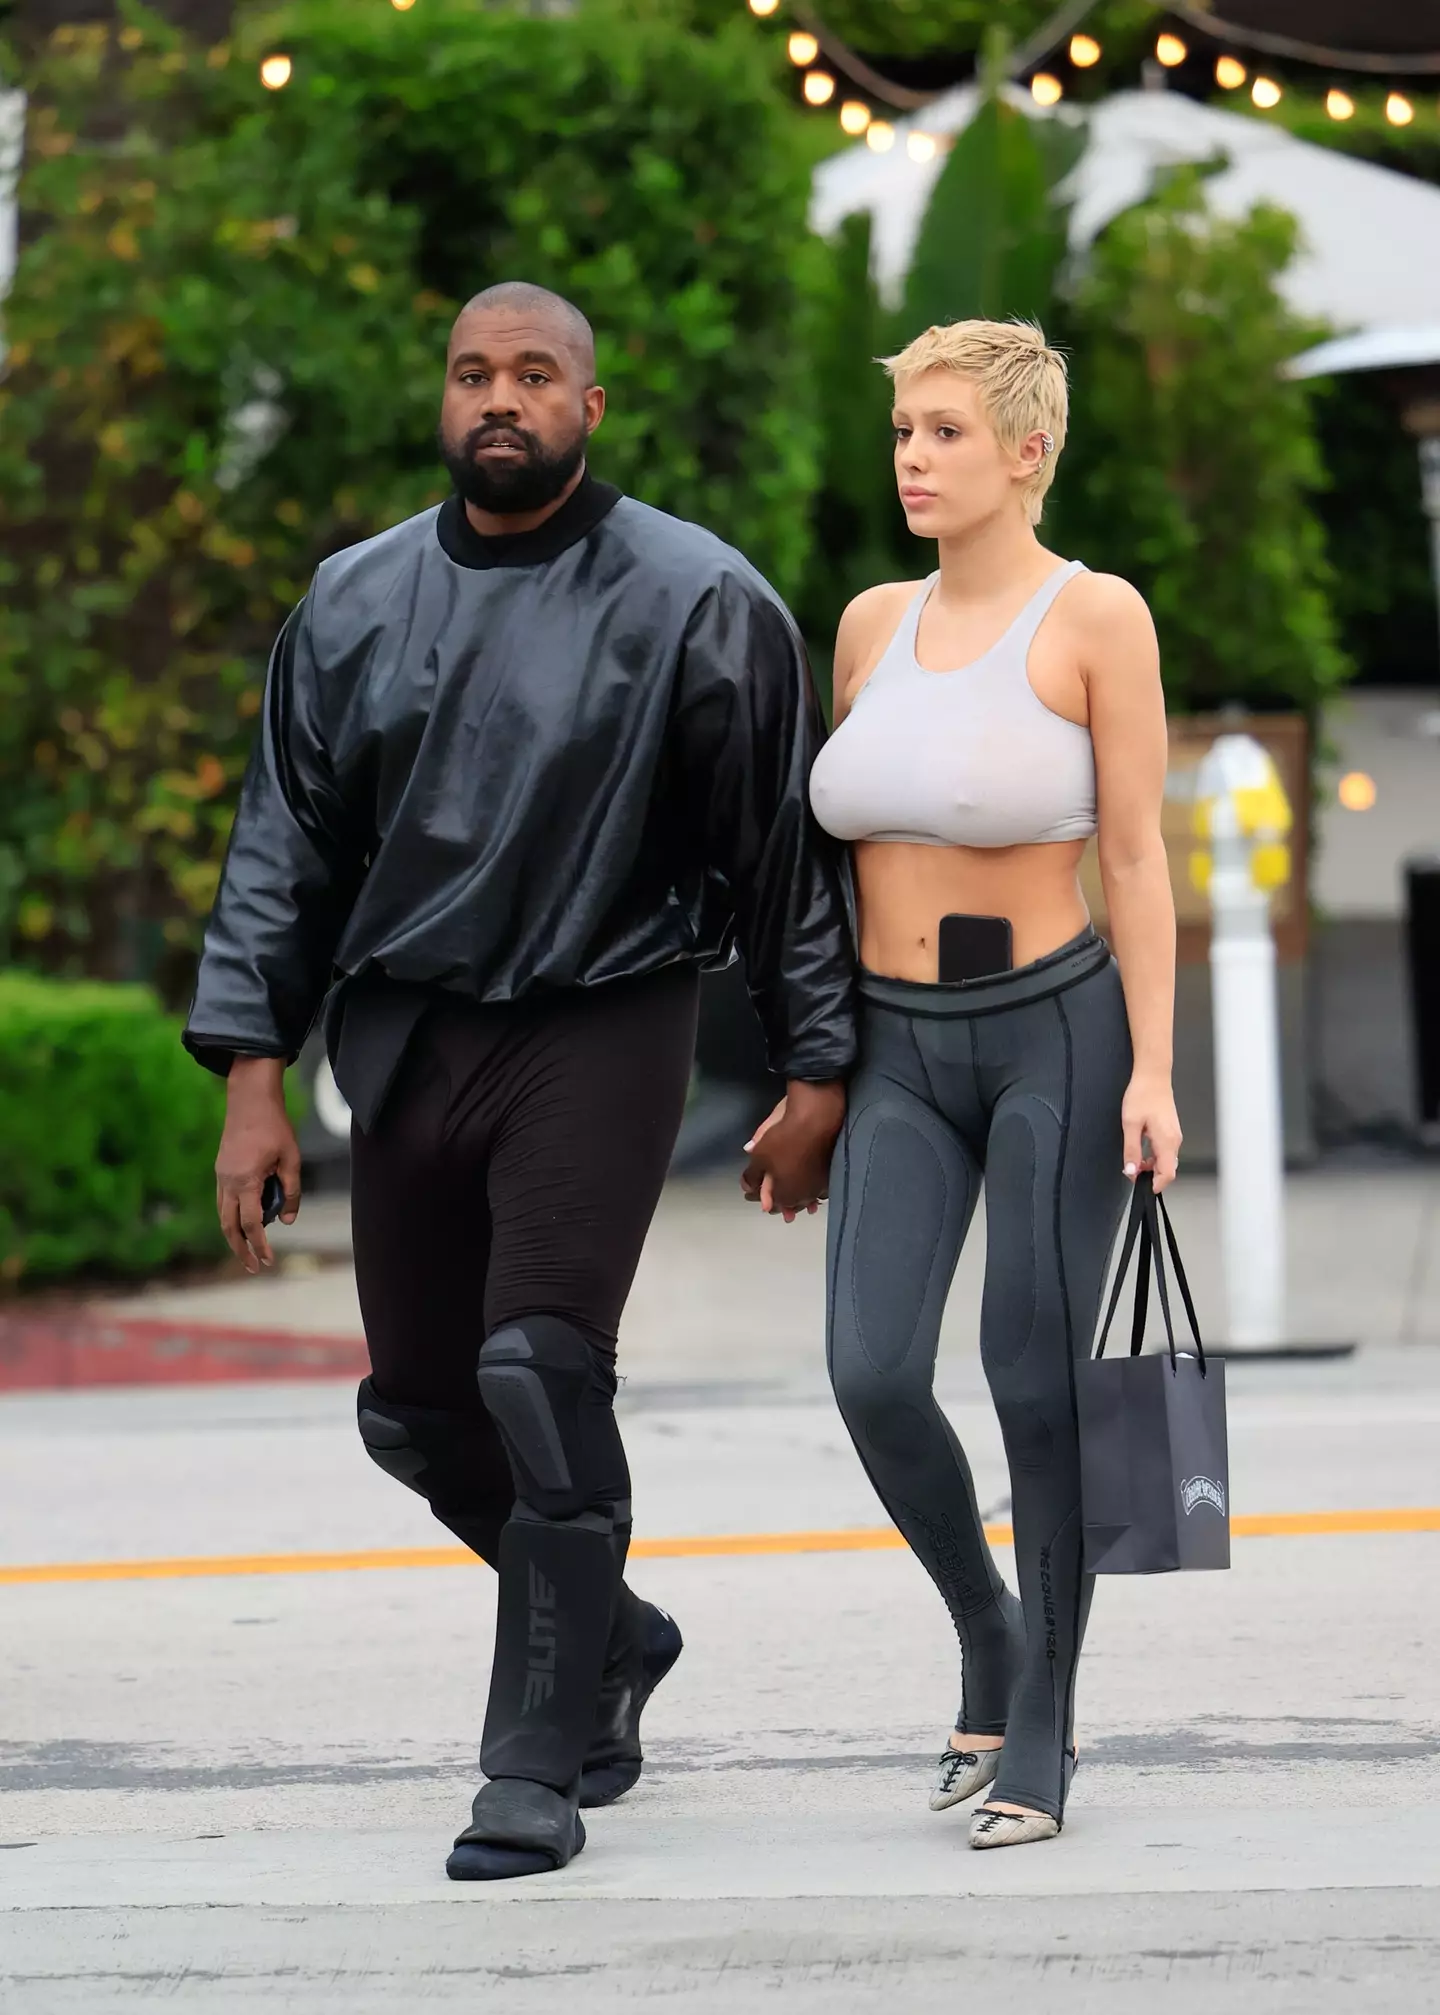 Kanye regularly shows off his wife's impressive figure on social media.